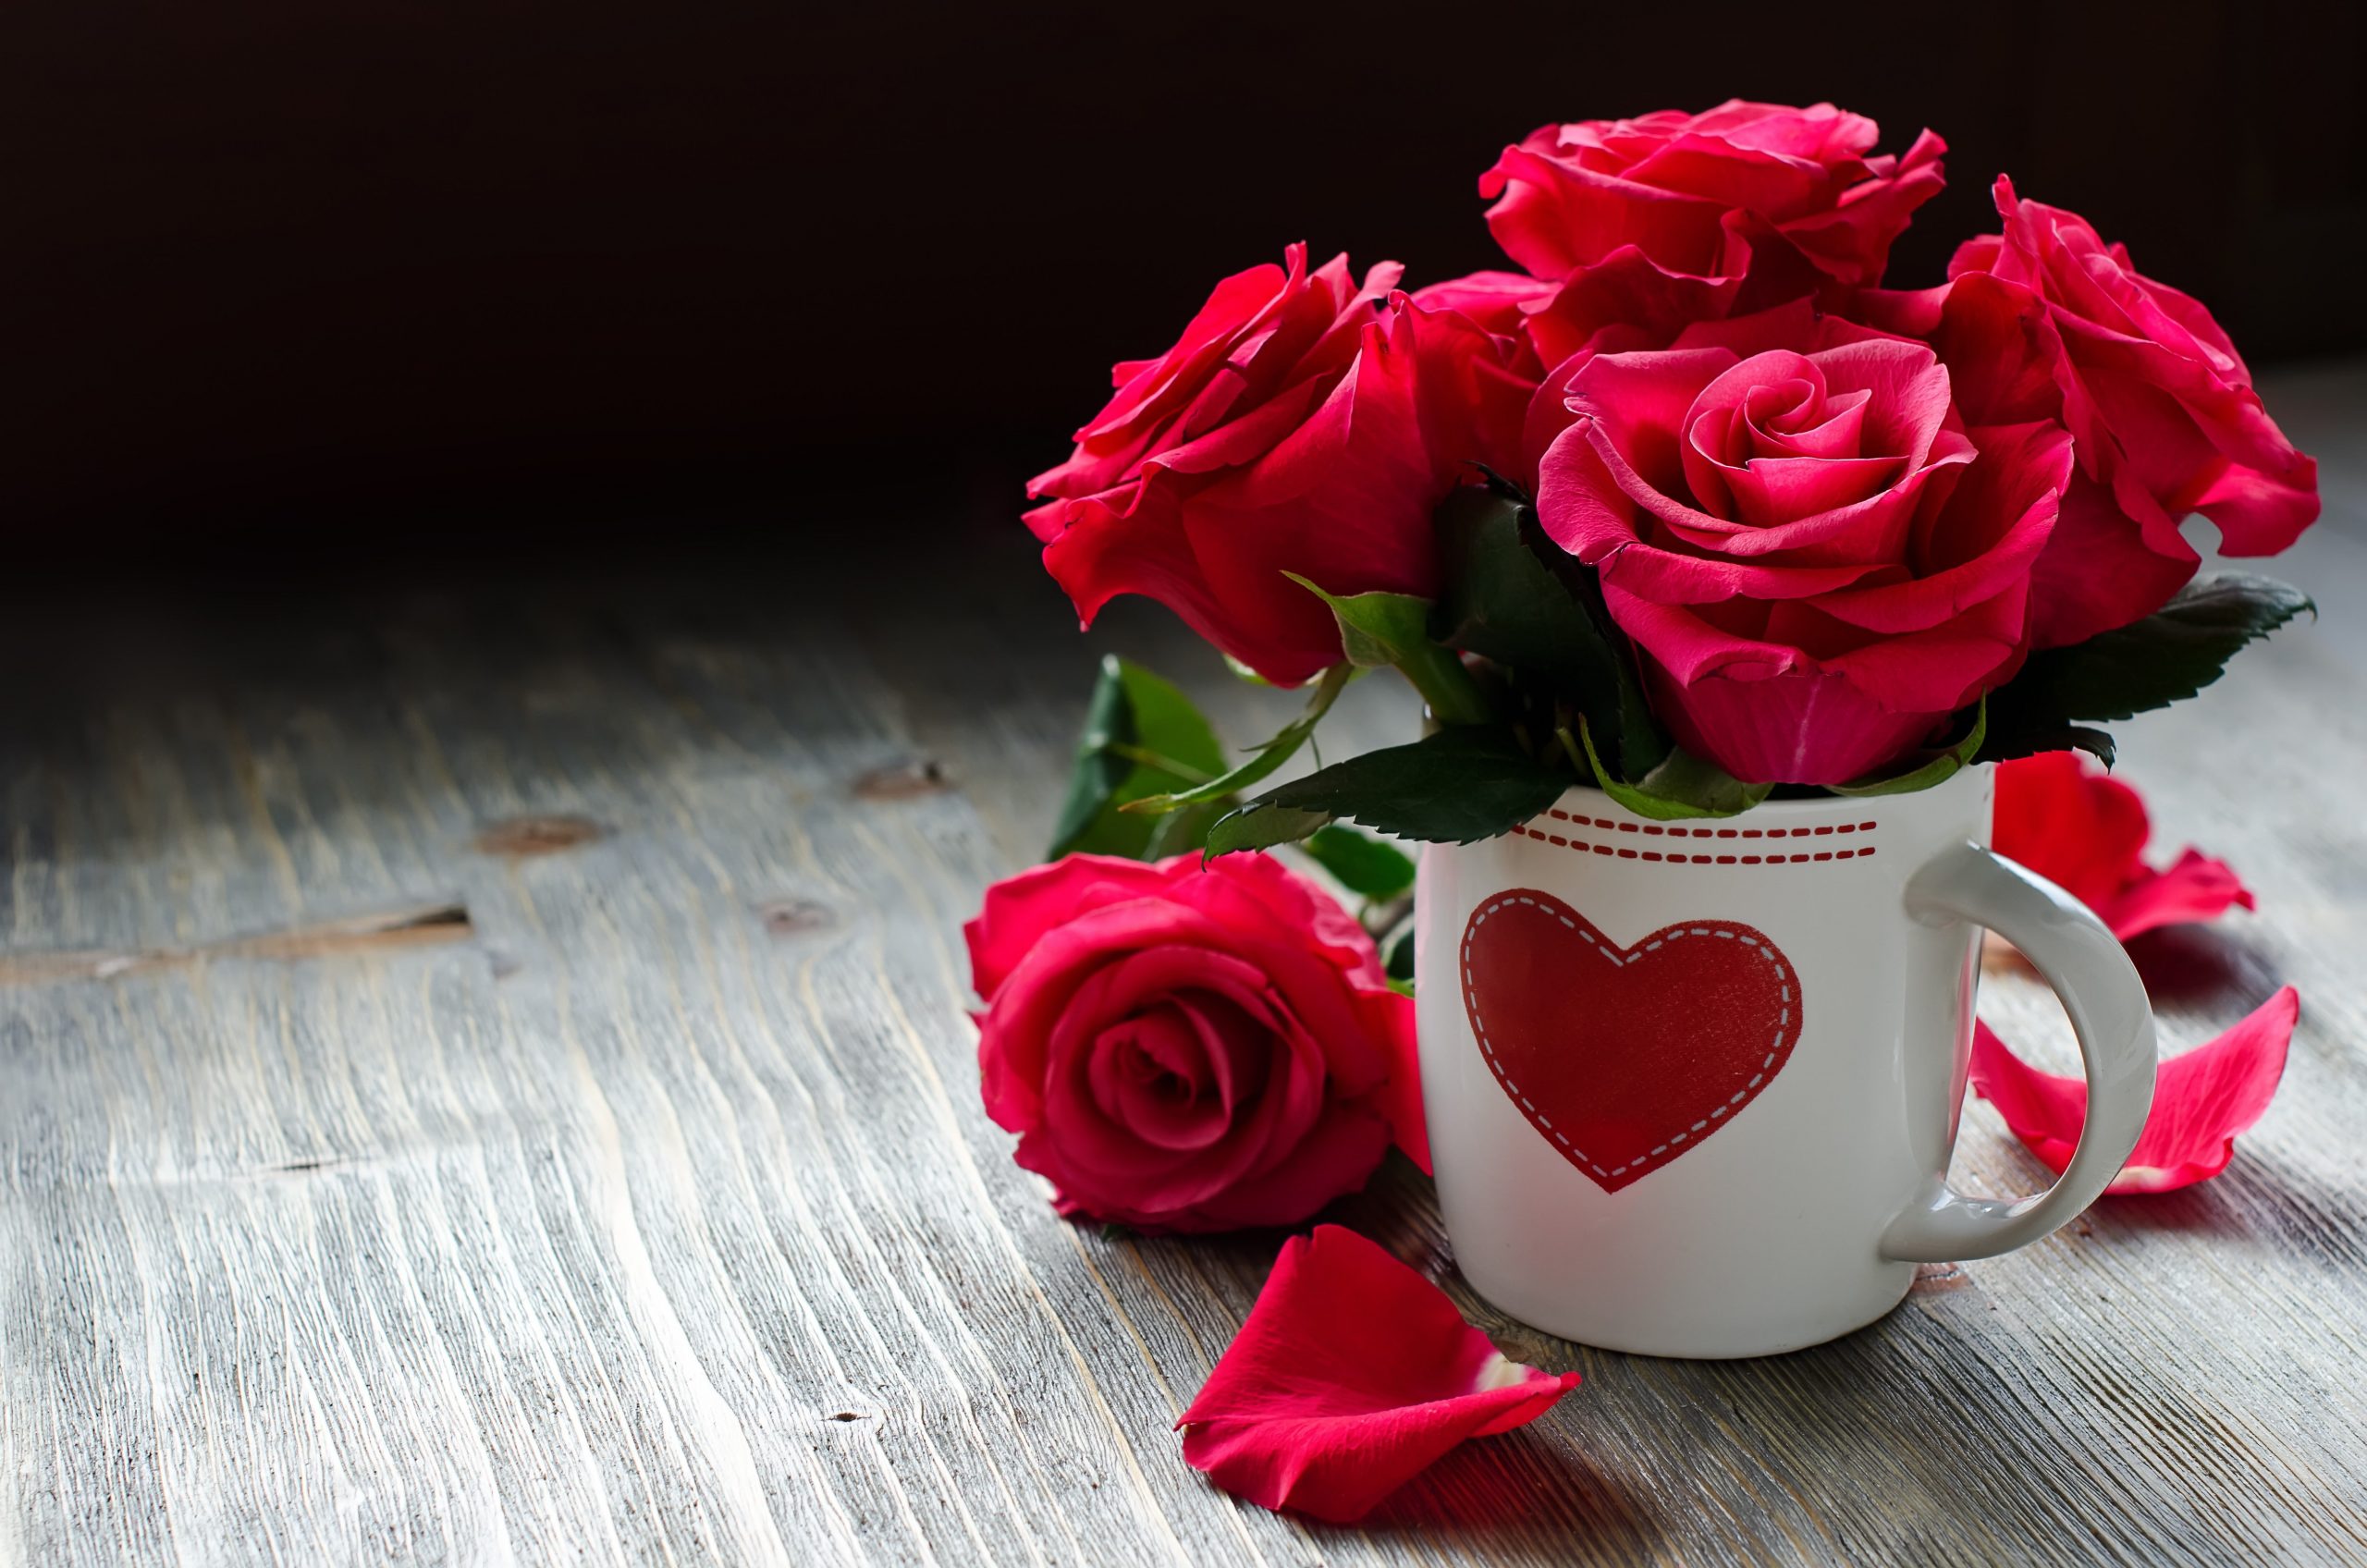 Roses, flowers, heart, red rose with white ceramic coffee cup wallpaper